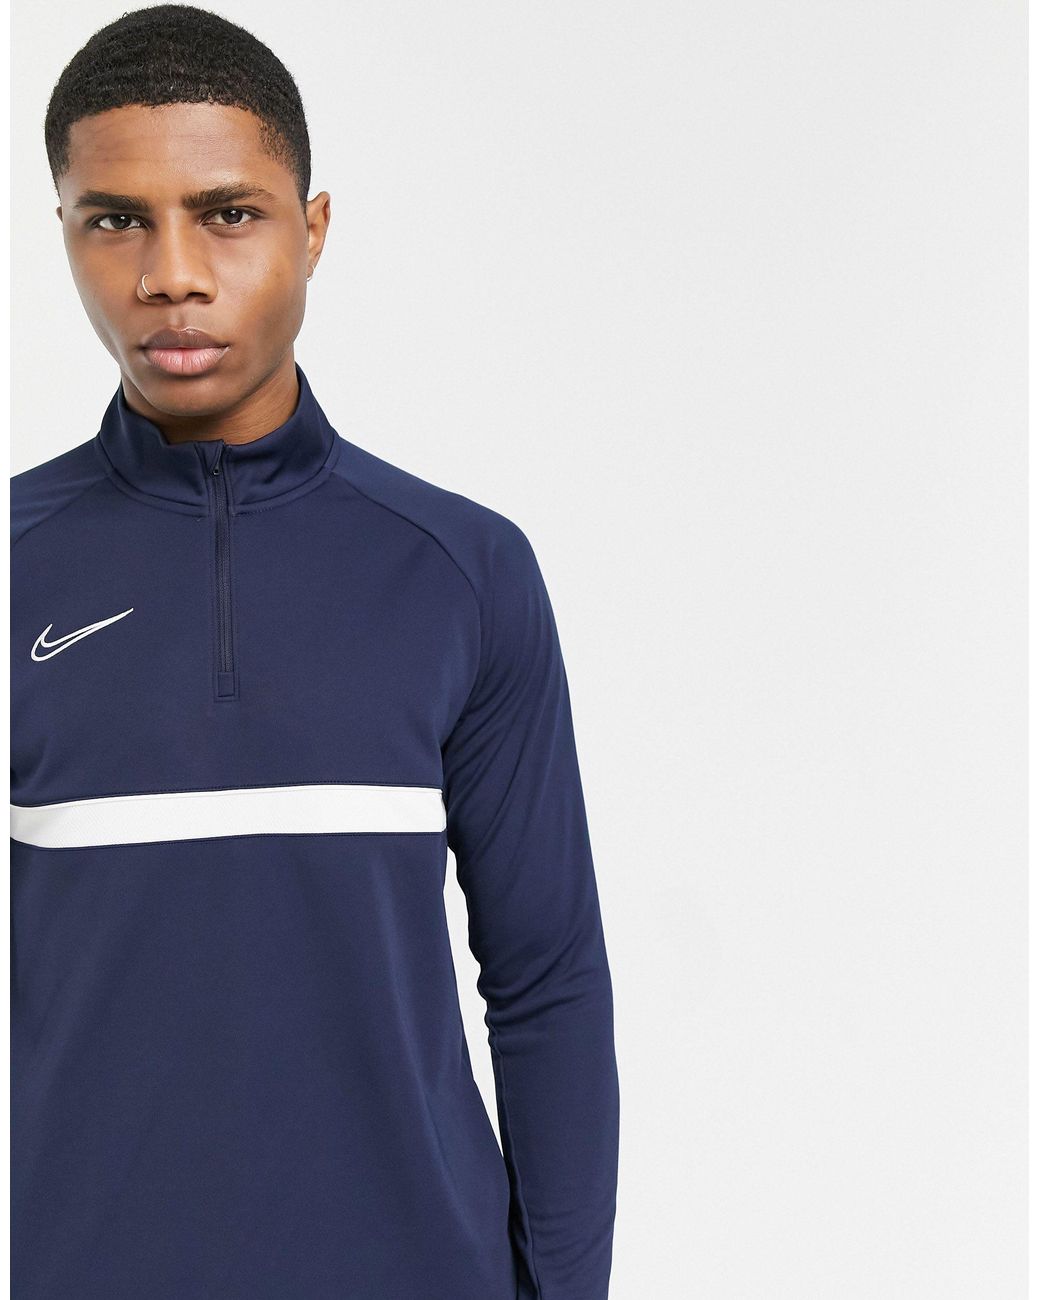 Nike Football Academy Drill Top in Navy (Blue) for Men - Save 40% | Lyst